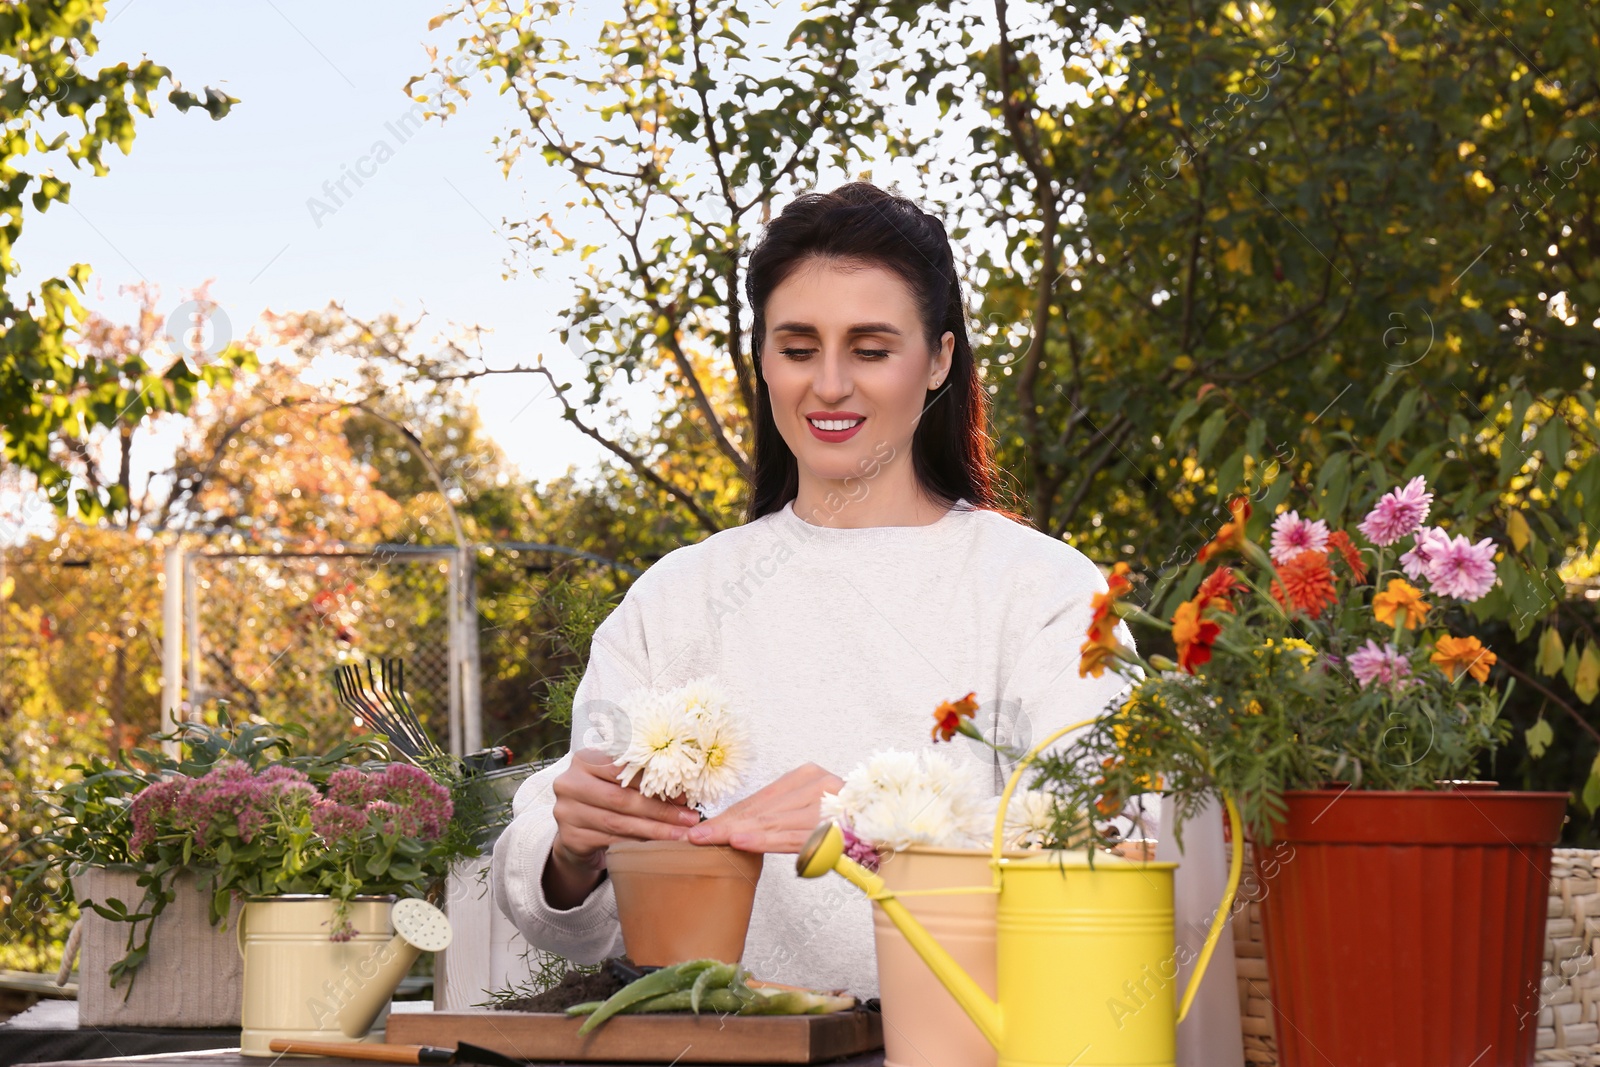 Photo of Woman transplanting flower into pot in garden